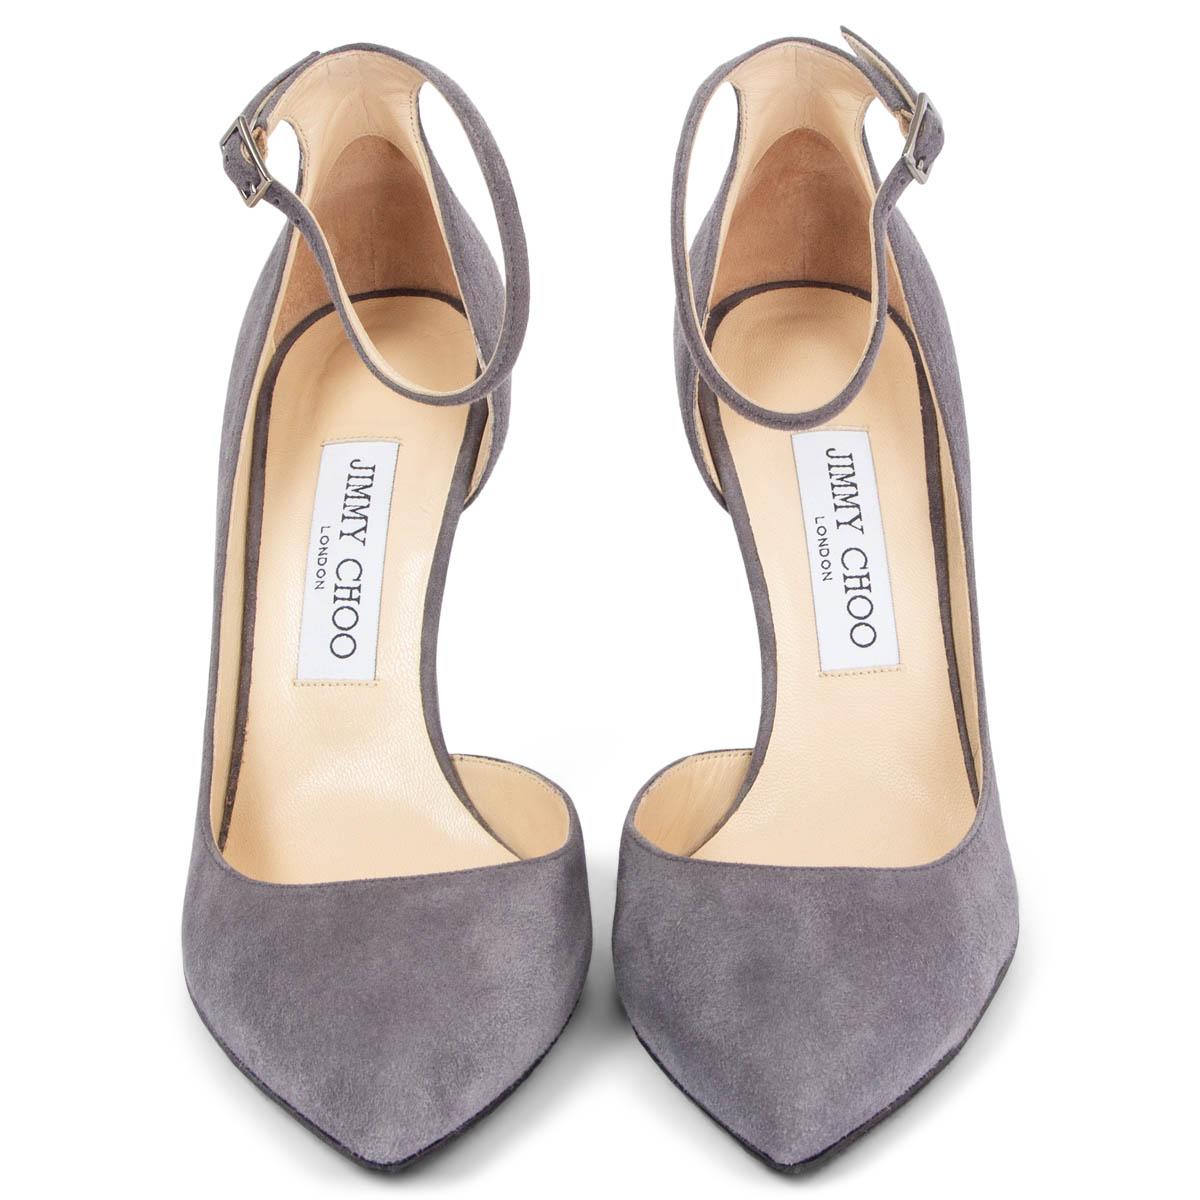 100% authentic Jimmy Choo Lucy pointed-toe ankle-strap pumps in grey suede. Have been worn once inside and are in virtually new condition. Black rubber sole has been added. 

Measurements
Imprinted Size	37.5
Shoe Size	37.5
Inside Sole	24.5cm